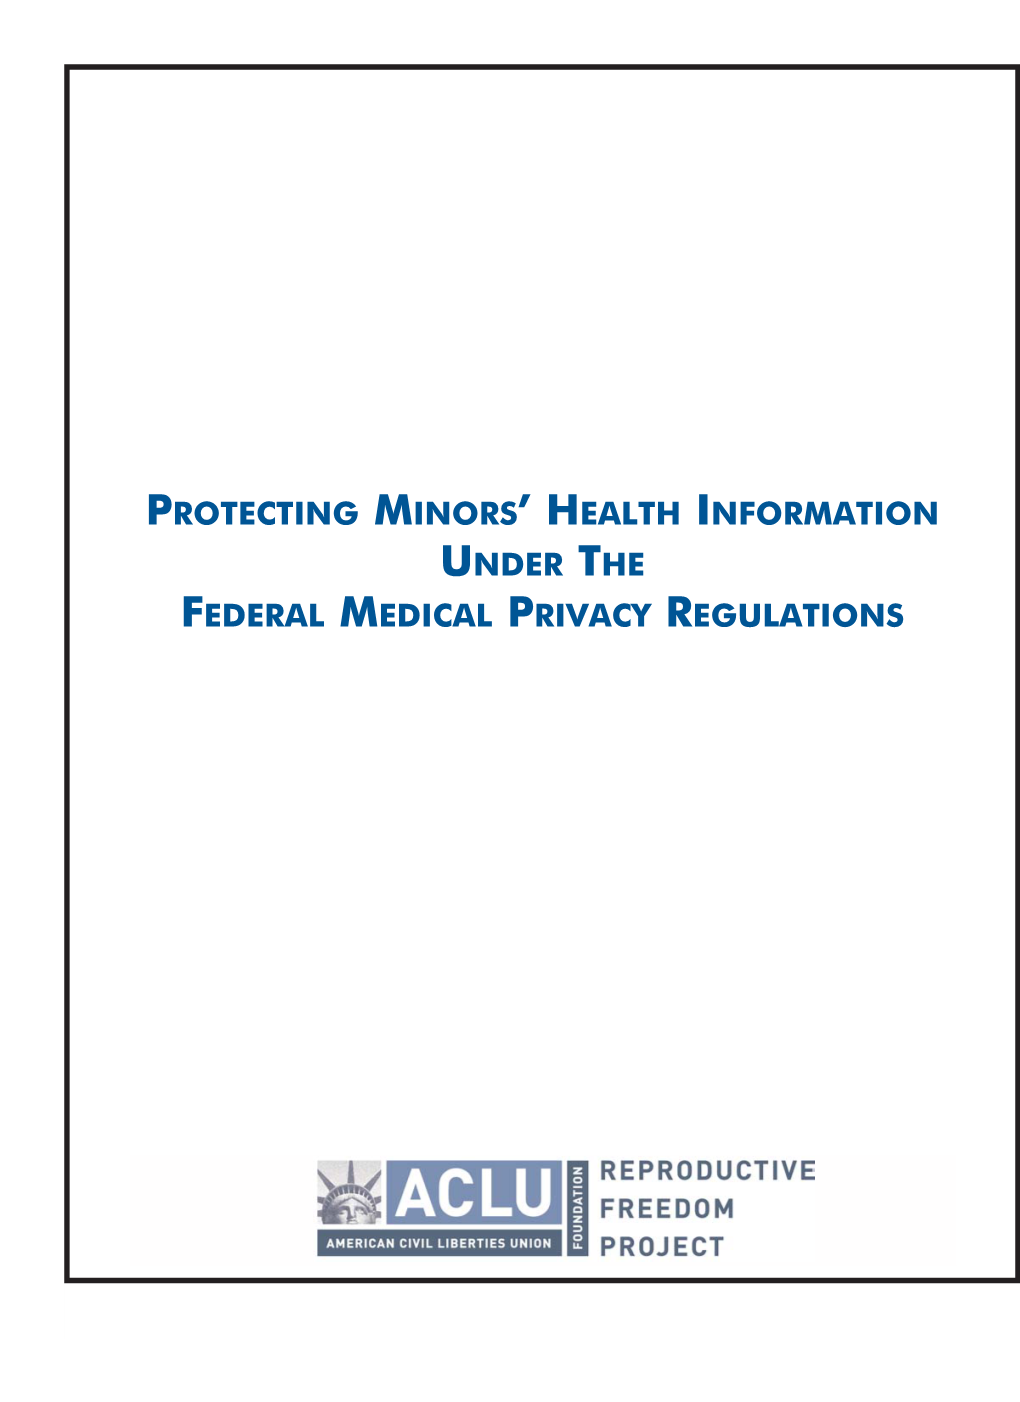 Protecting Minors' Health Information Under the Federal Medical Privacy